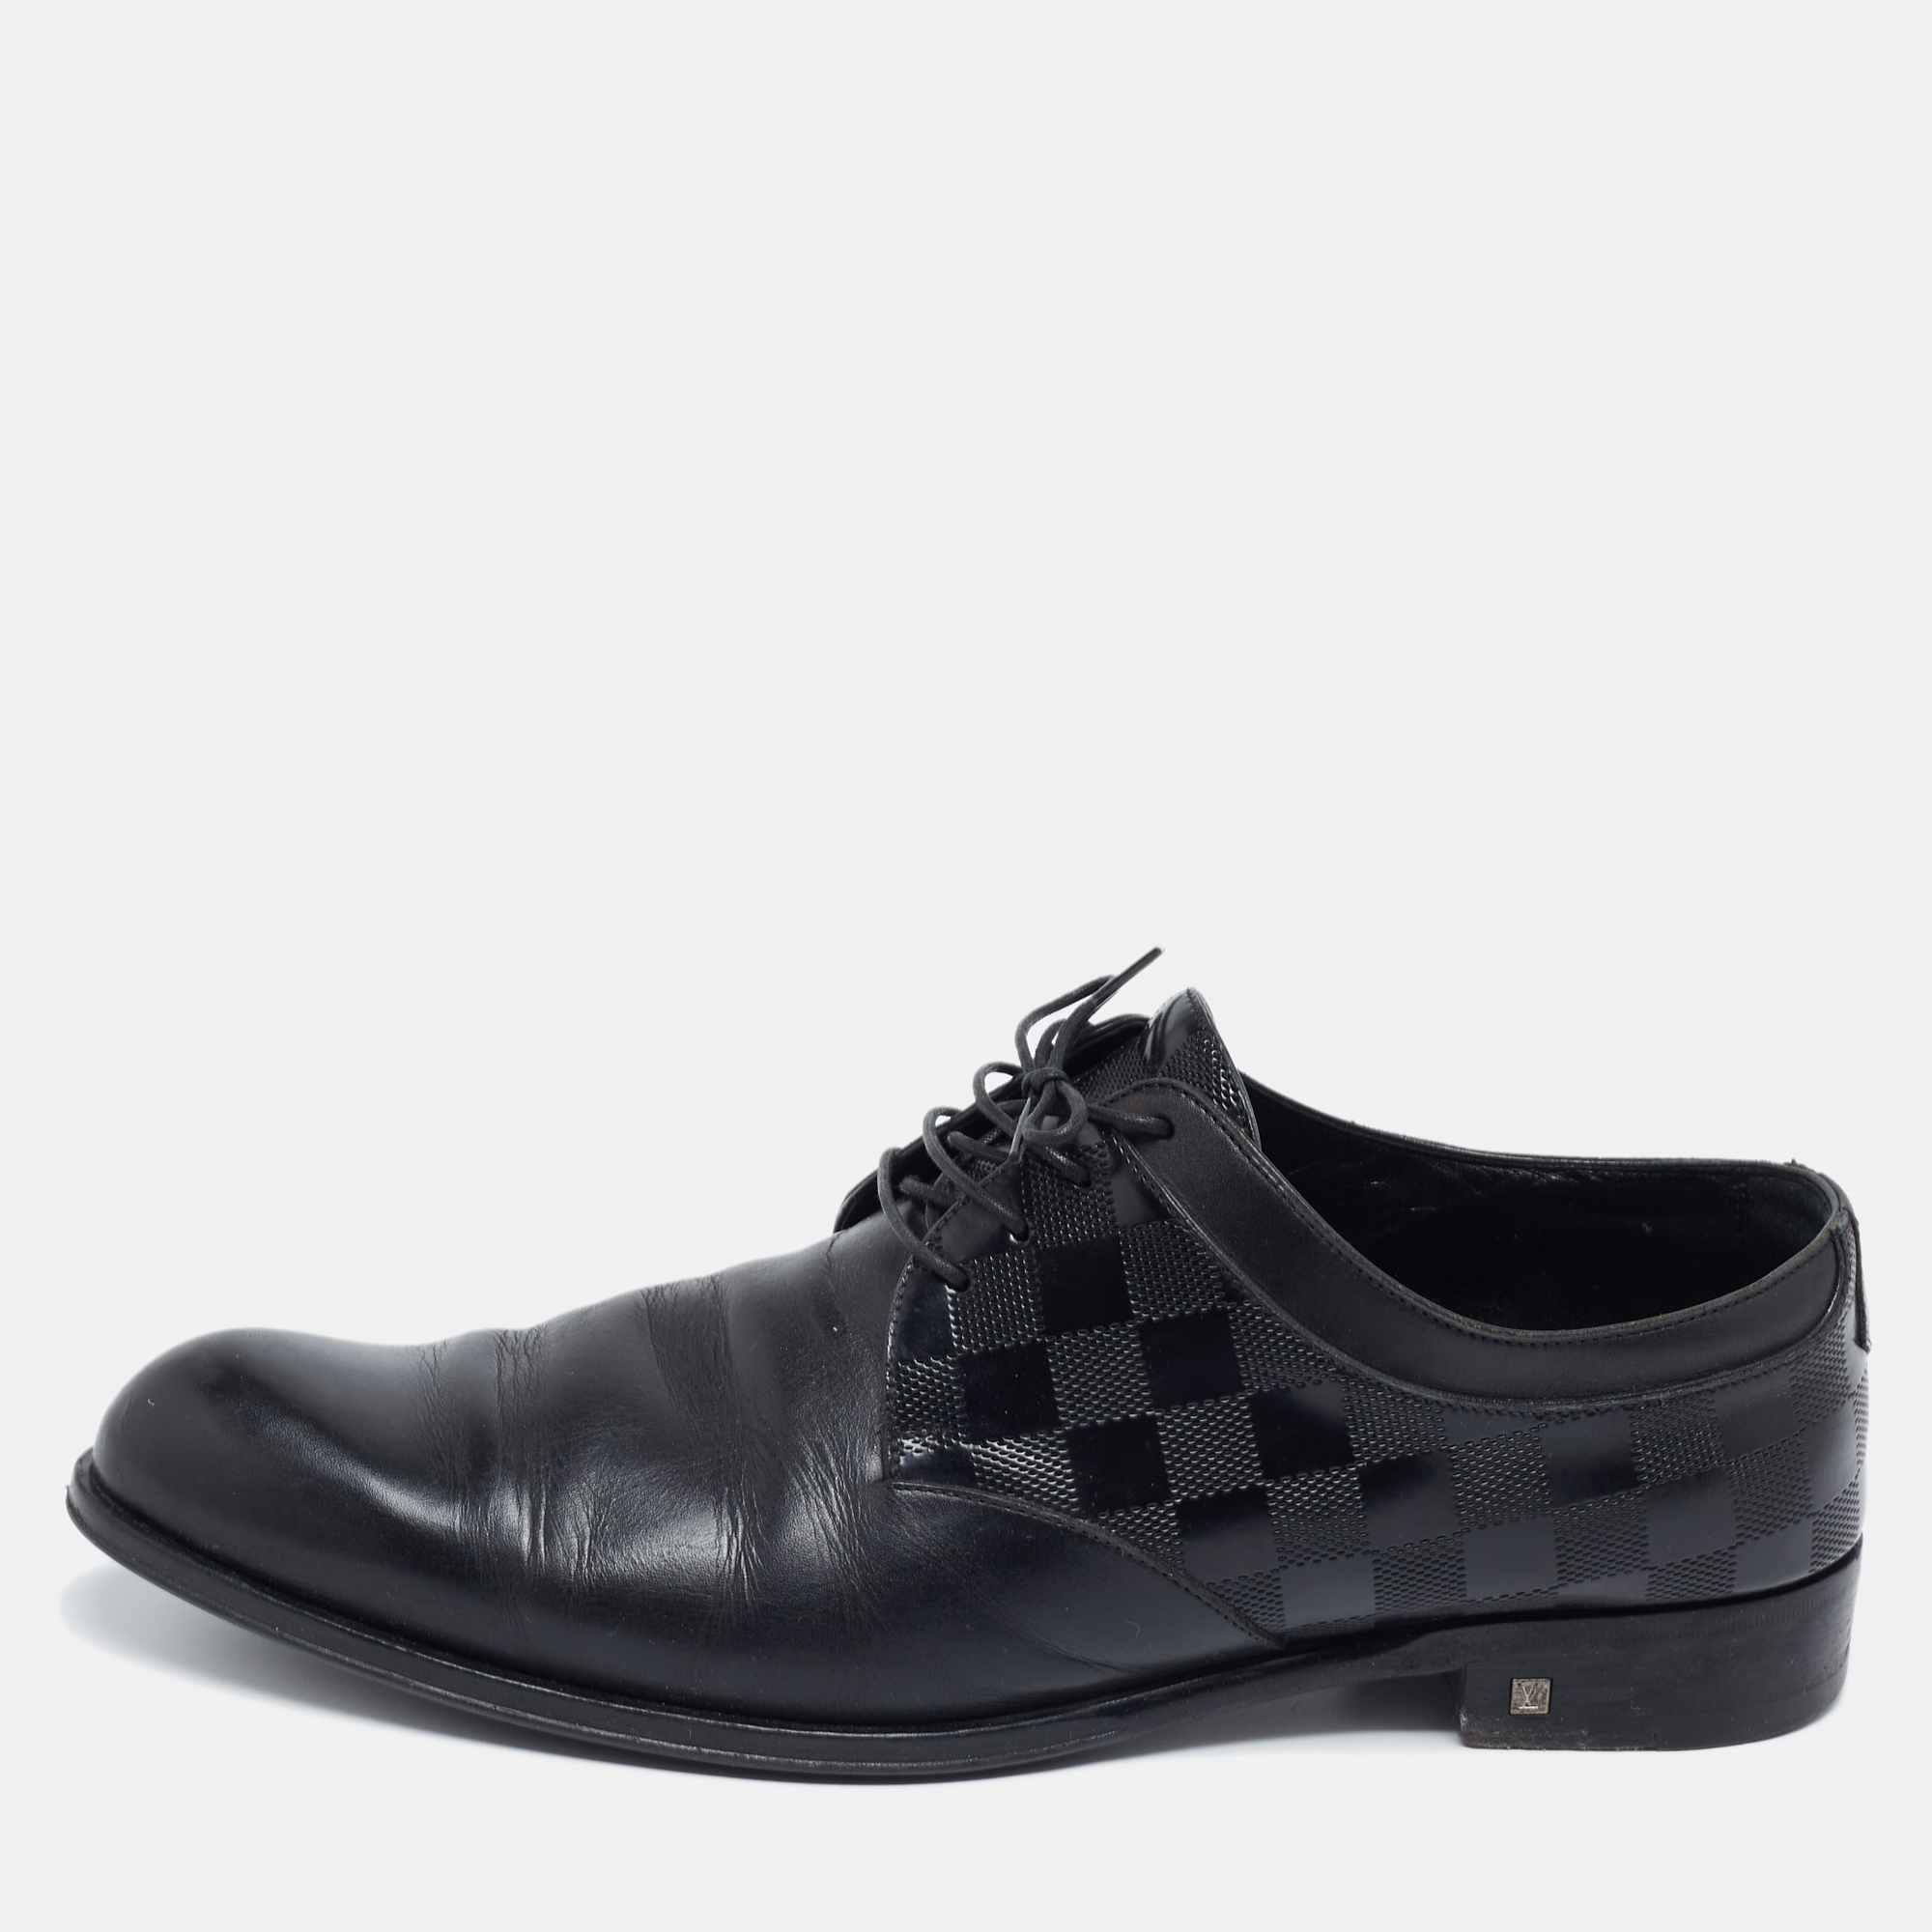 Pre-owned Louis Vuitton Black Damier Embossed Leather Lace-up Derby Size 43